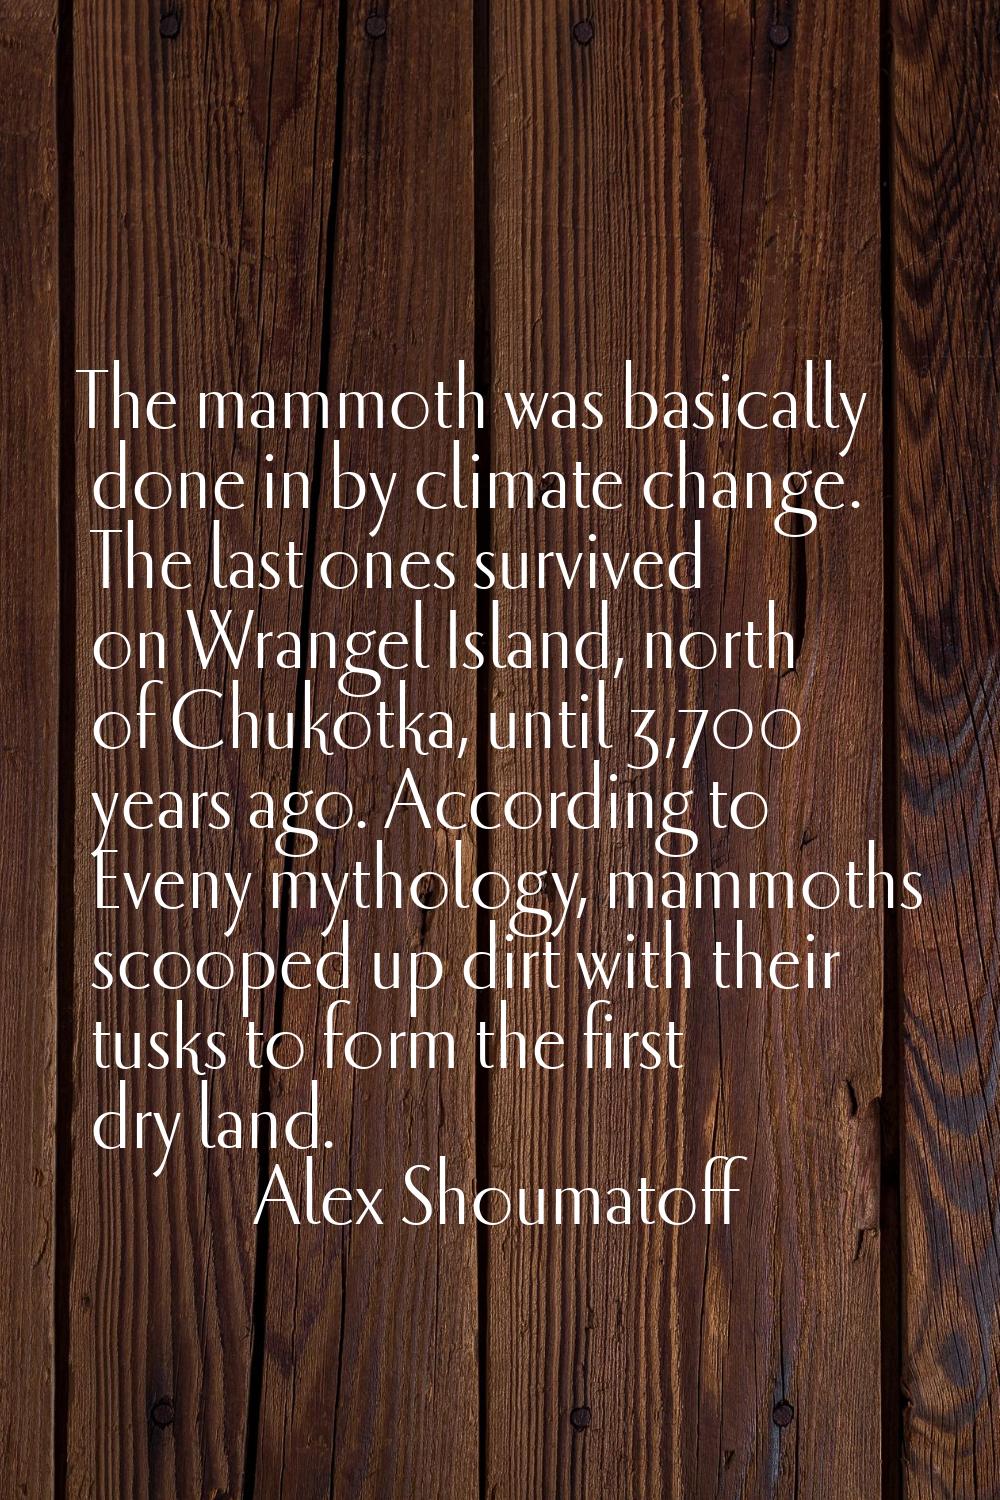 The mammoth was basically done in by climate change. The last ones survived on Wrangel Island, nort